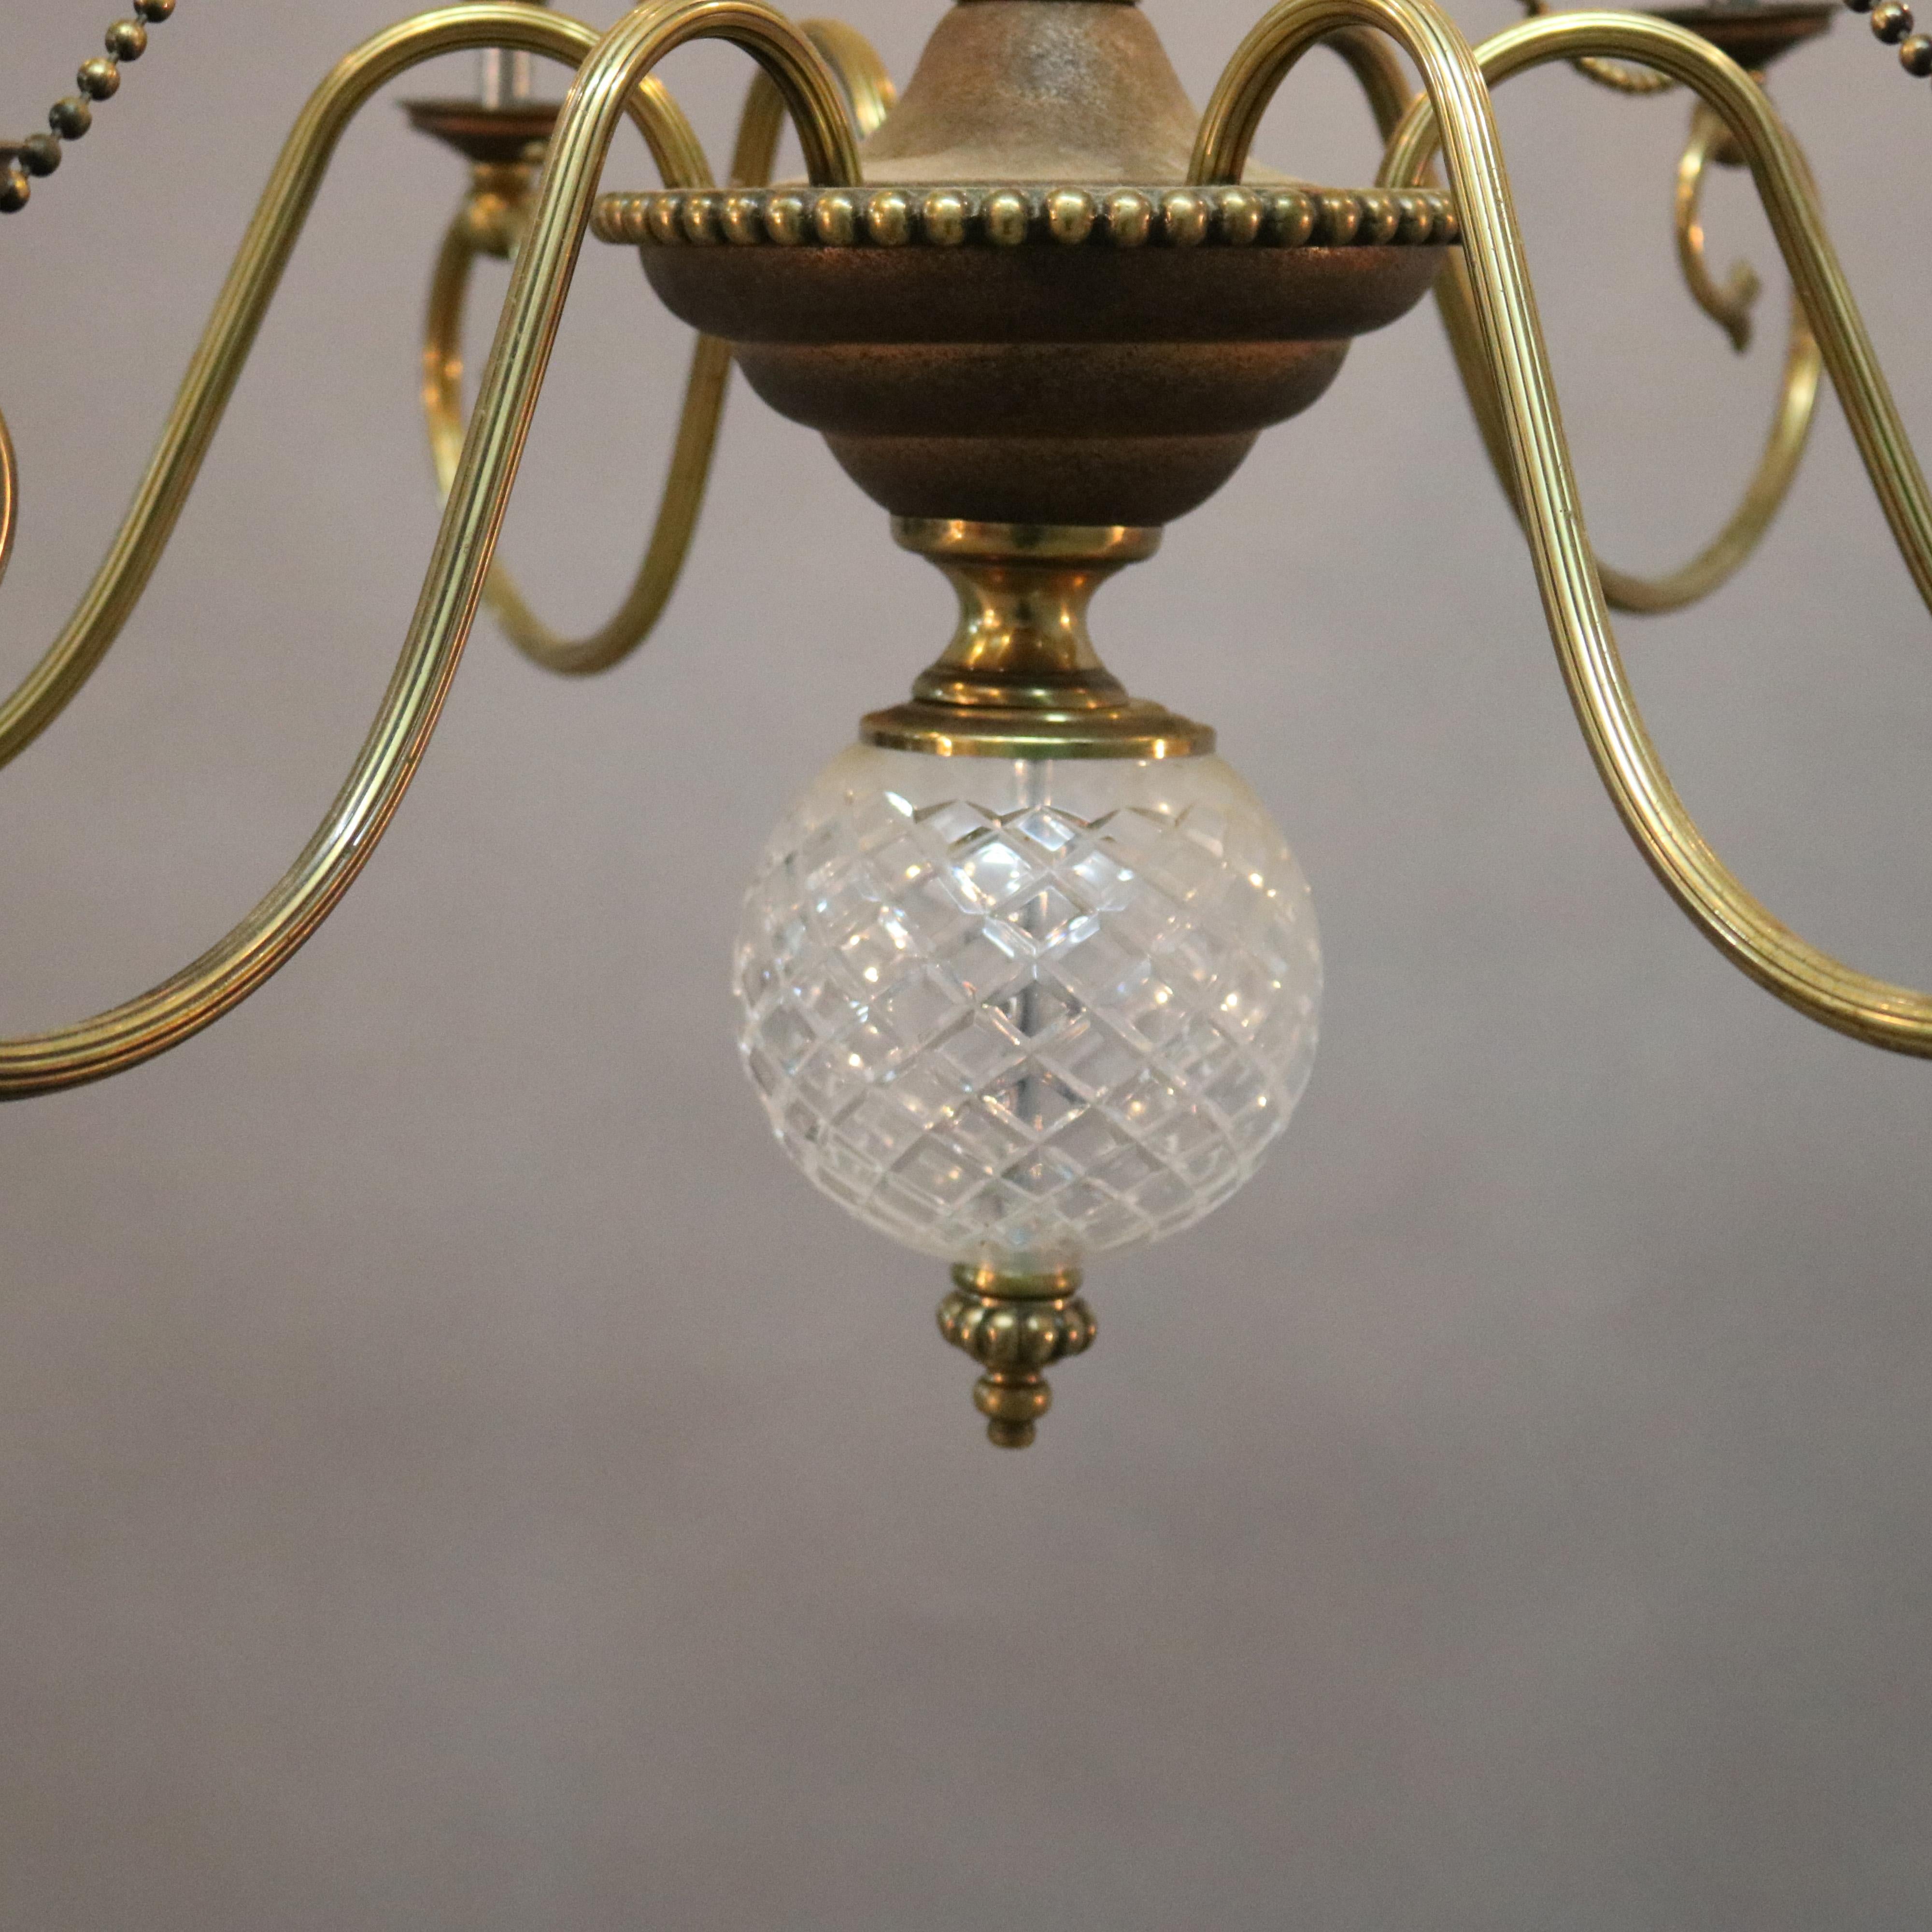 Vintage French Nine-Light Tiered Brass and Crystal Chandelier, 20th Century For Sale 5